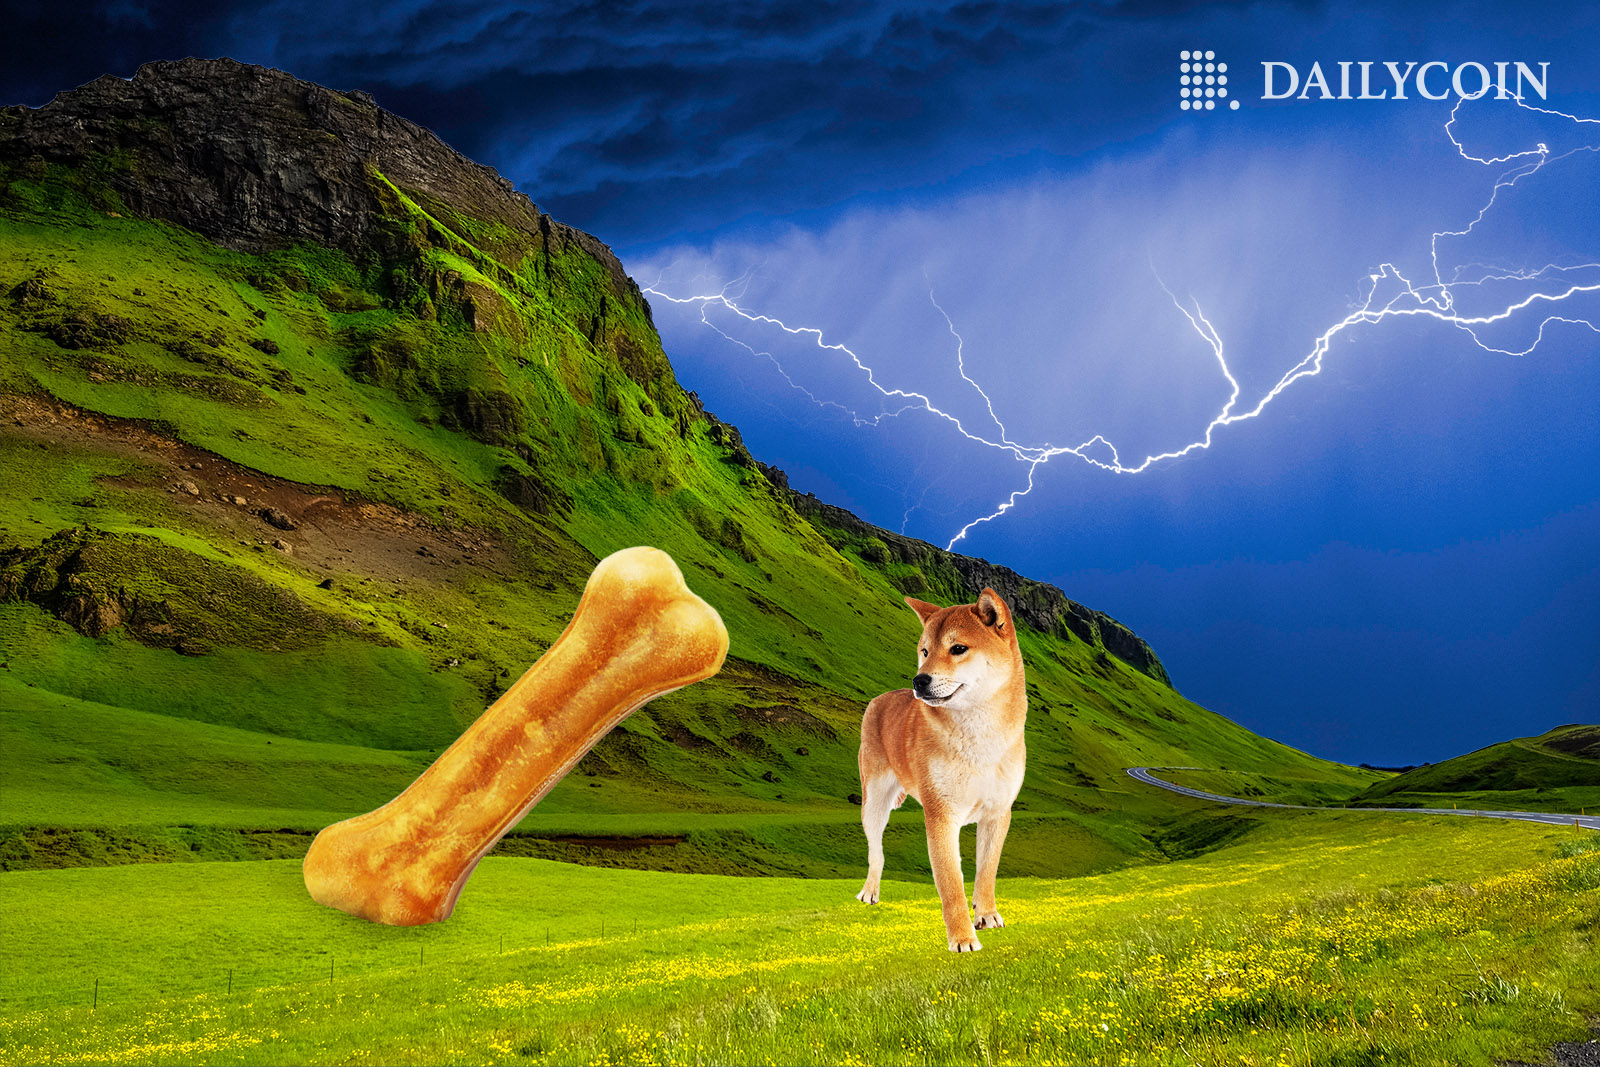 Shiba Inu walking in a green field smiling at a big tasty BONE as lightning emerges in the background.